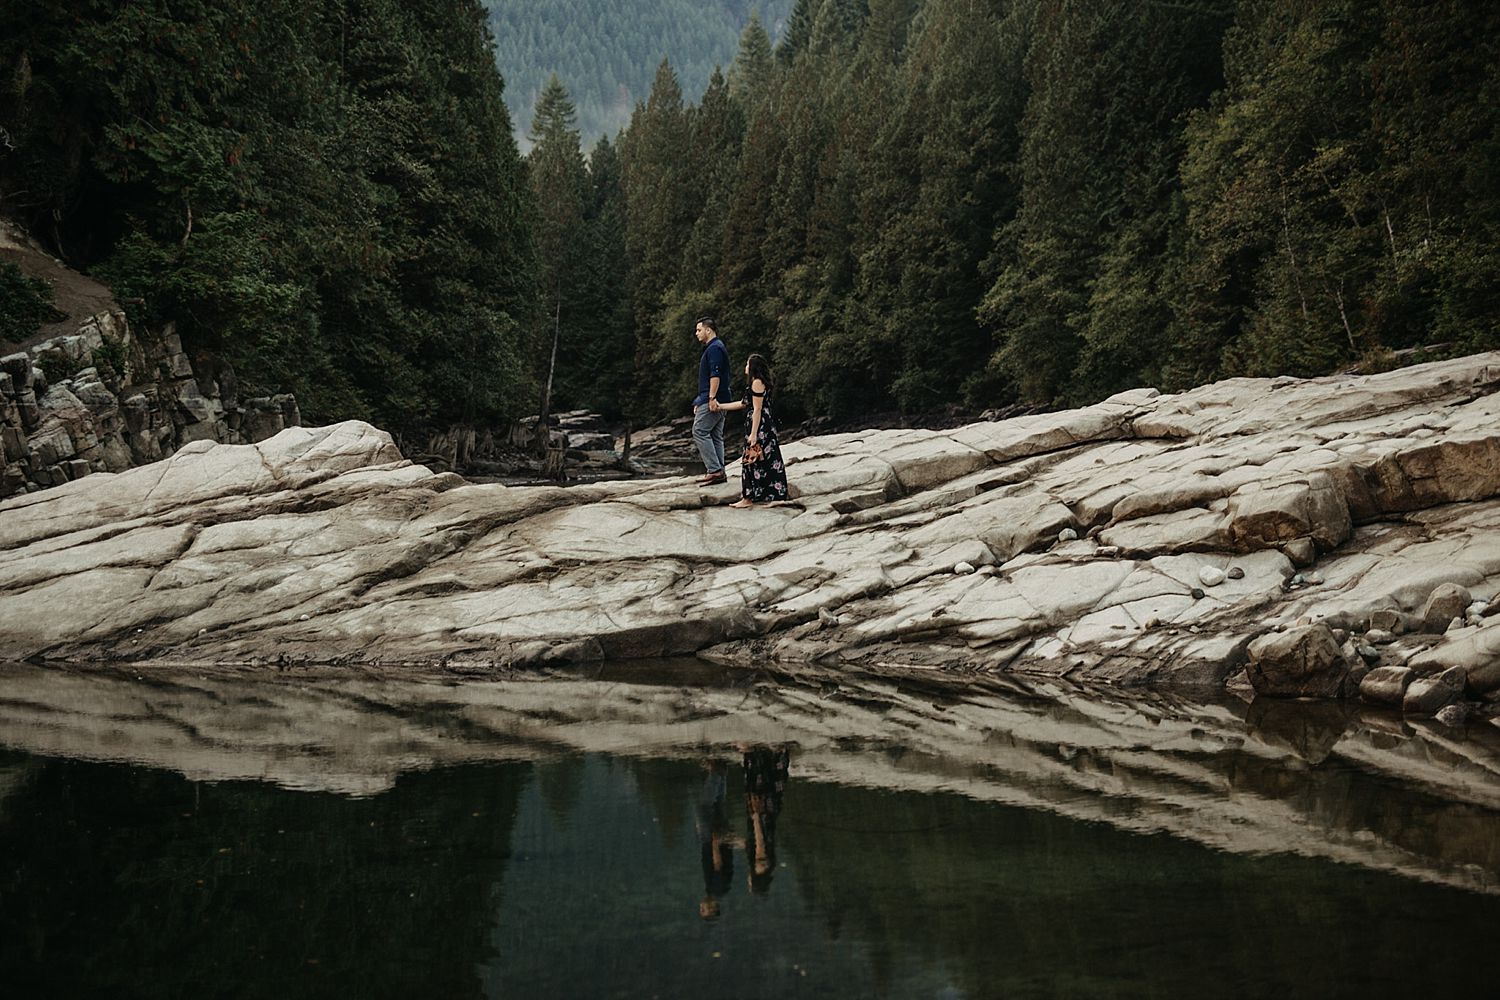 Copy of couple walking on rock reflection in water by trees